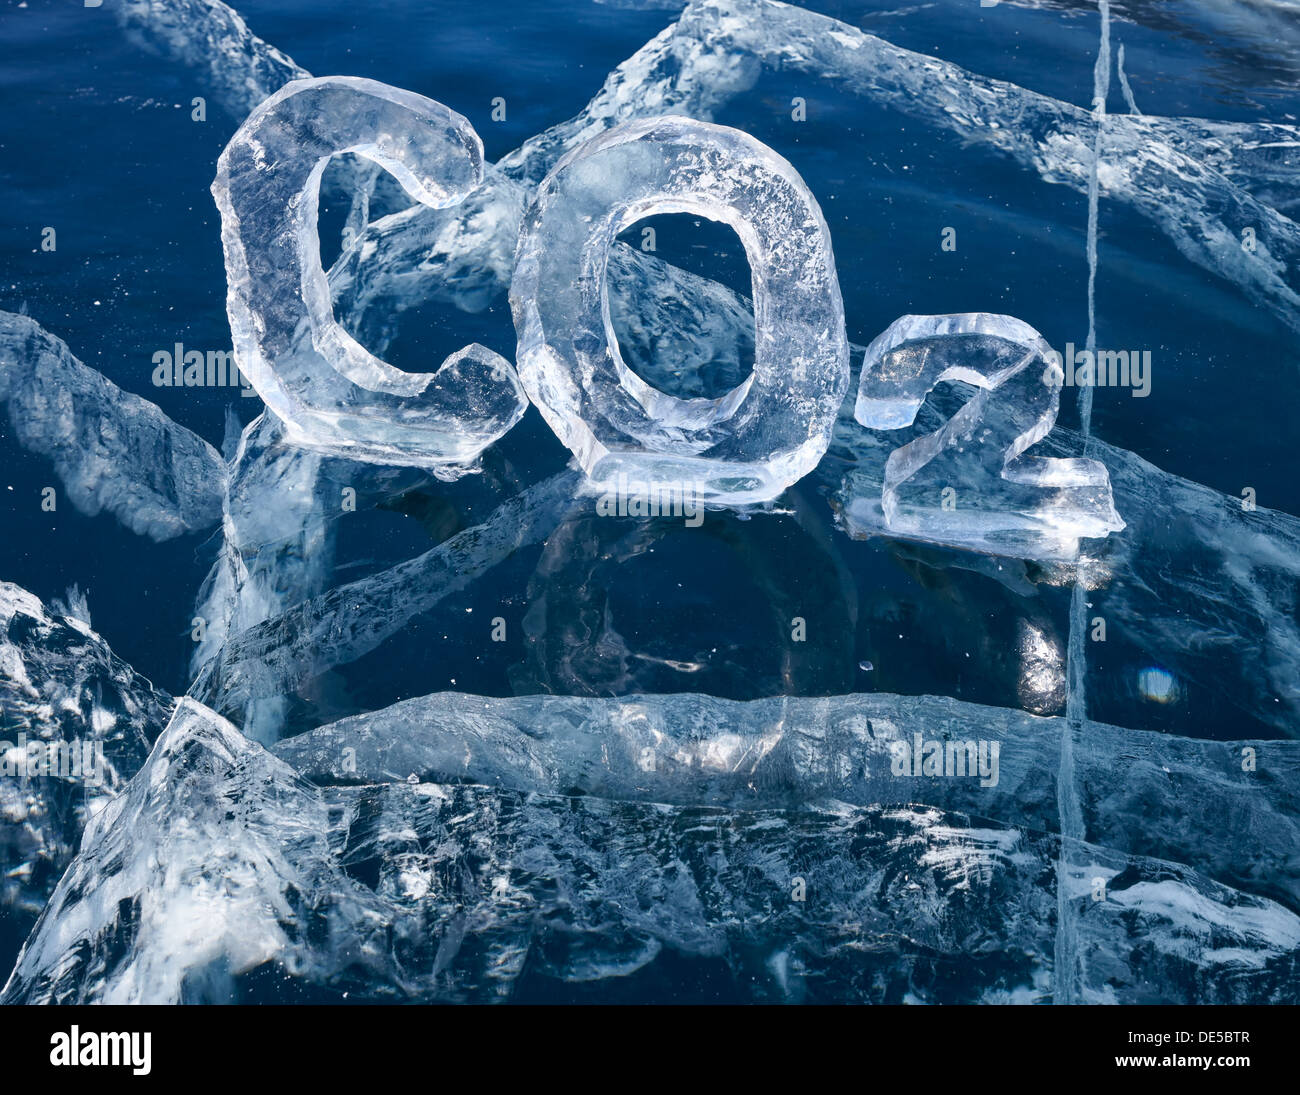 Chemical formula of greenhouse gas carbon dioxide CO2 made from ice on winter frozen lake Baikal  Stock Photo